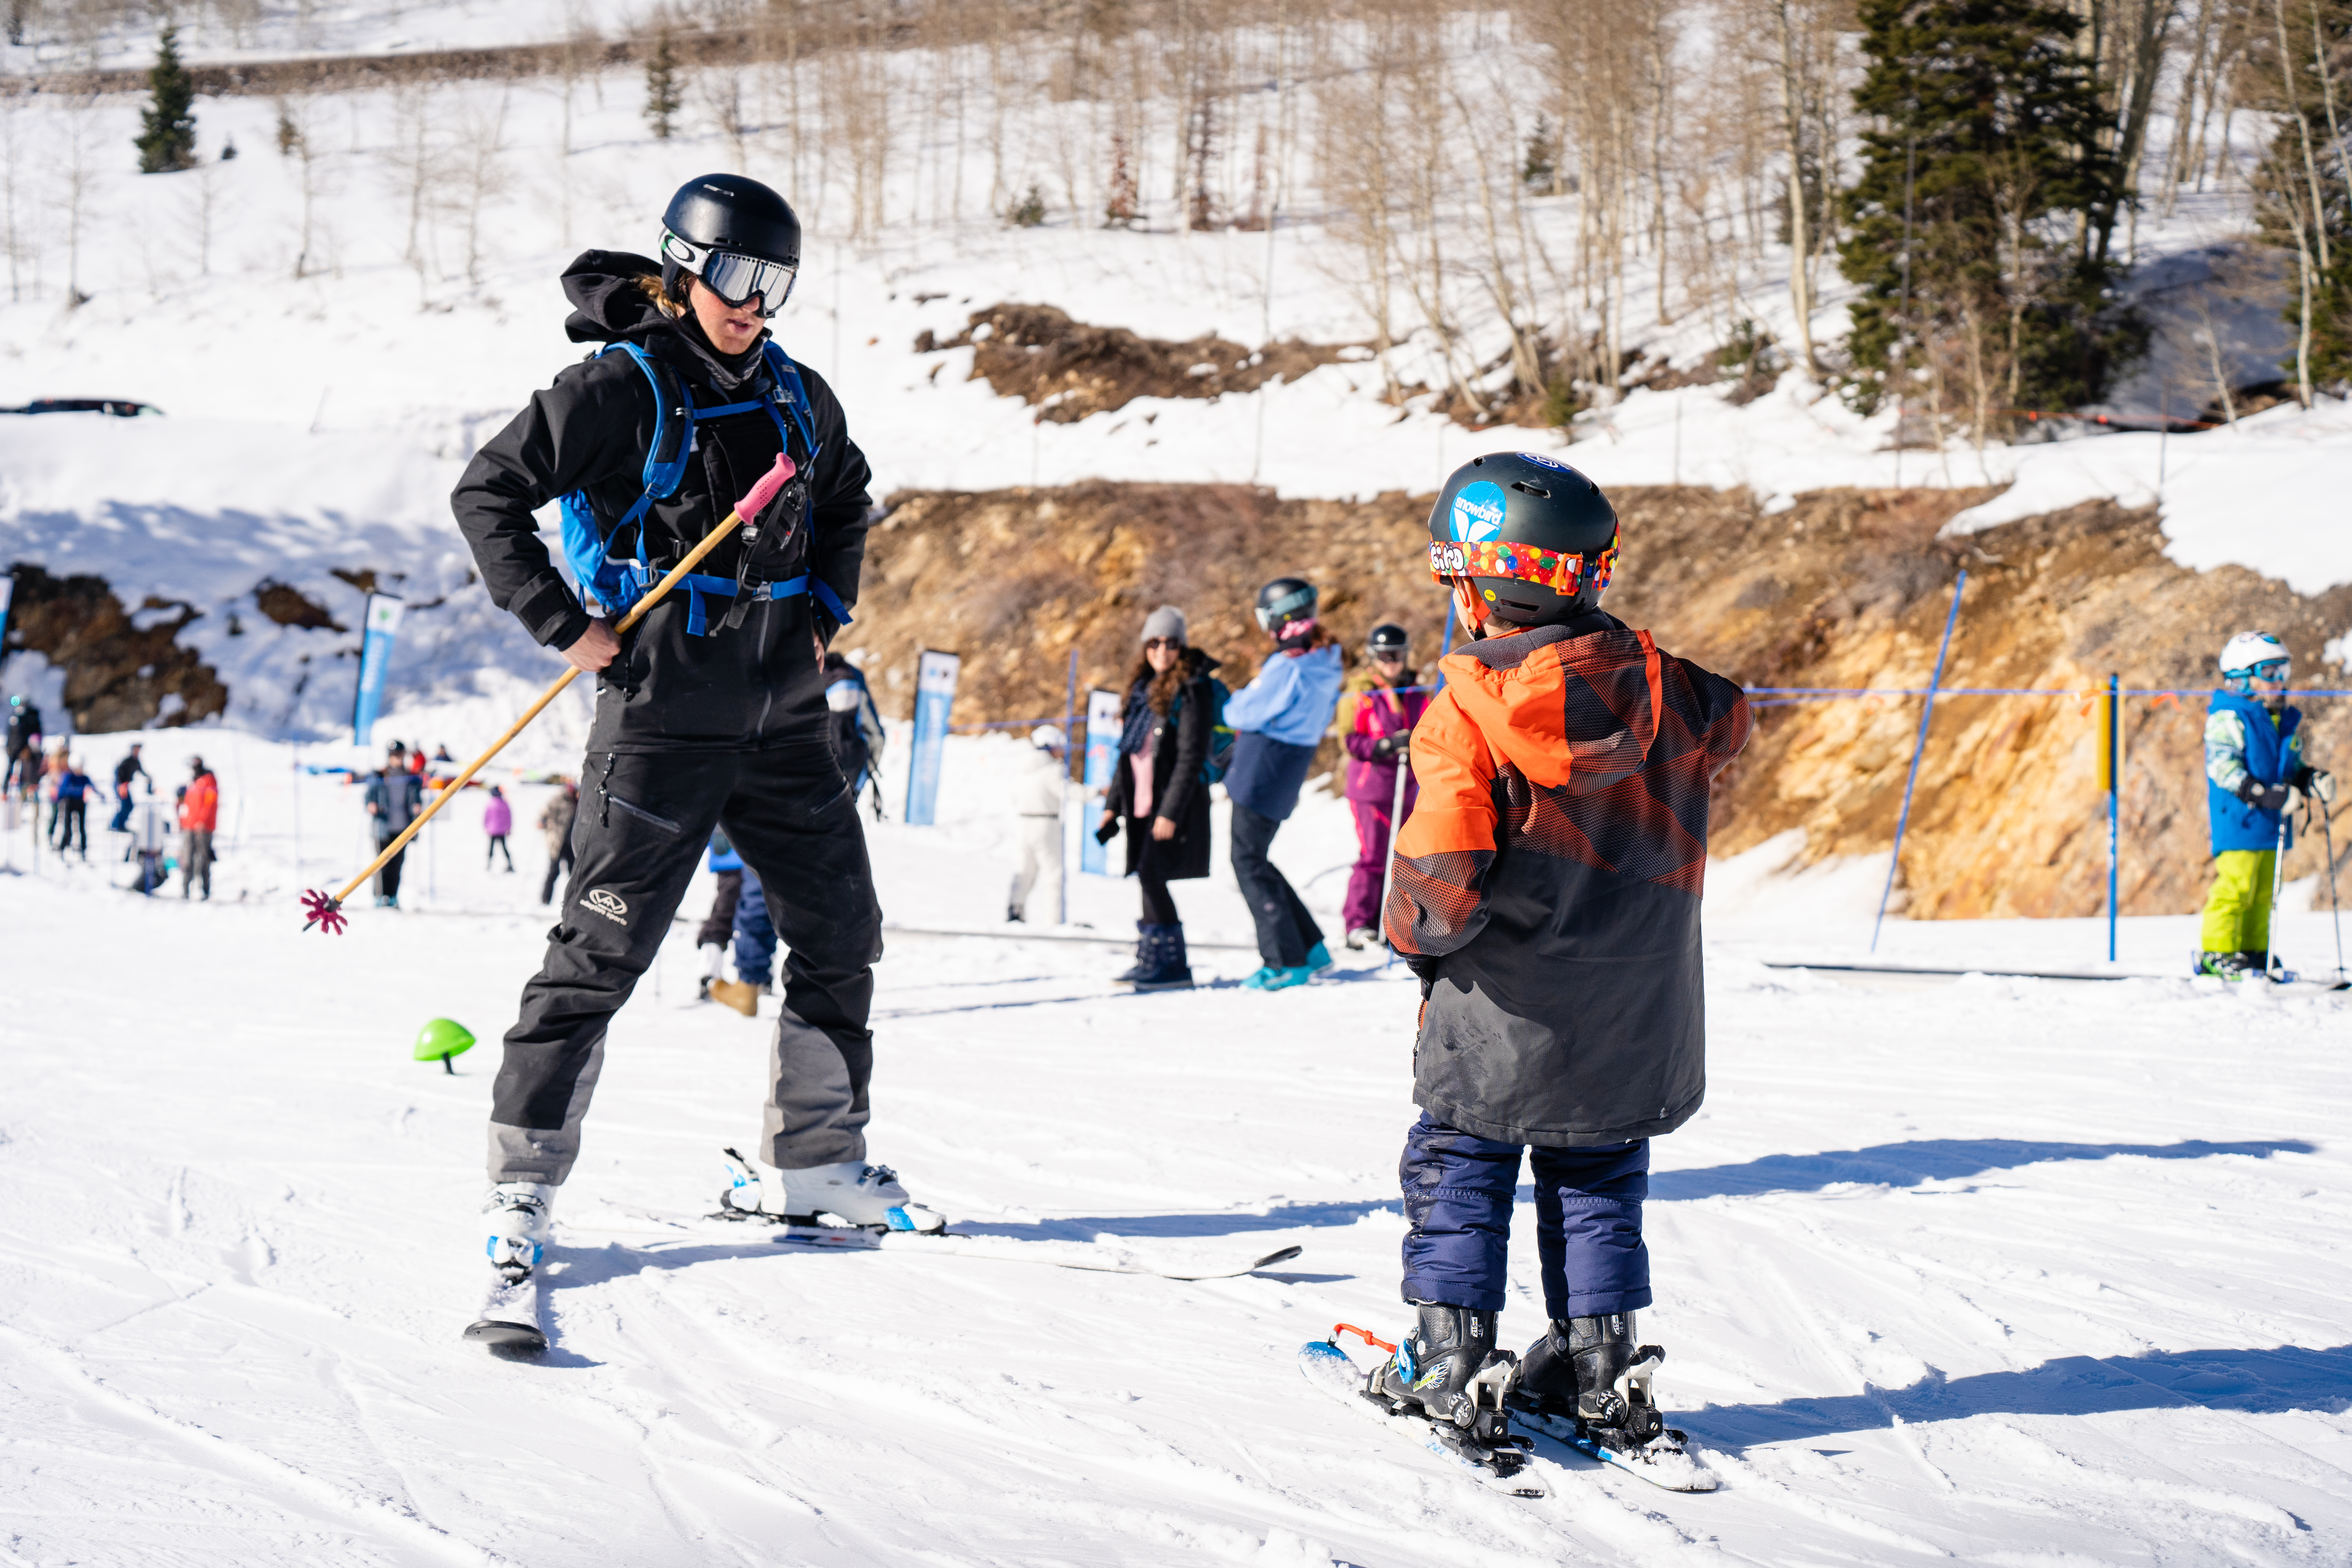 Wasatch Adaptive team member teaching young kid how to ski at Snowbird